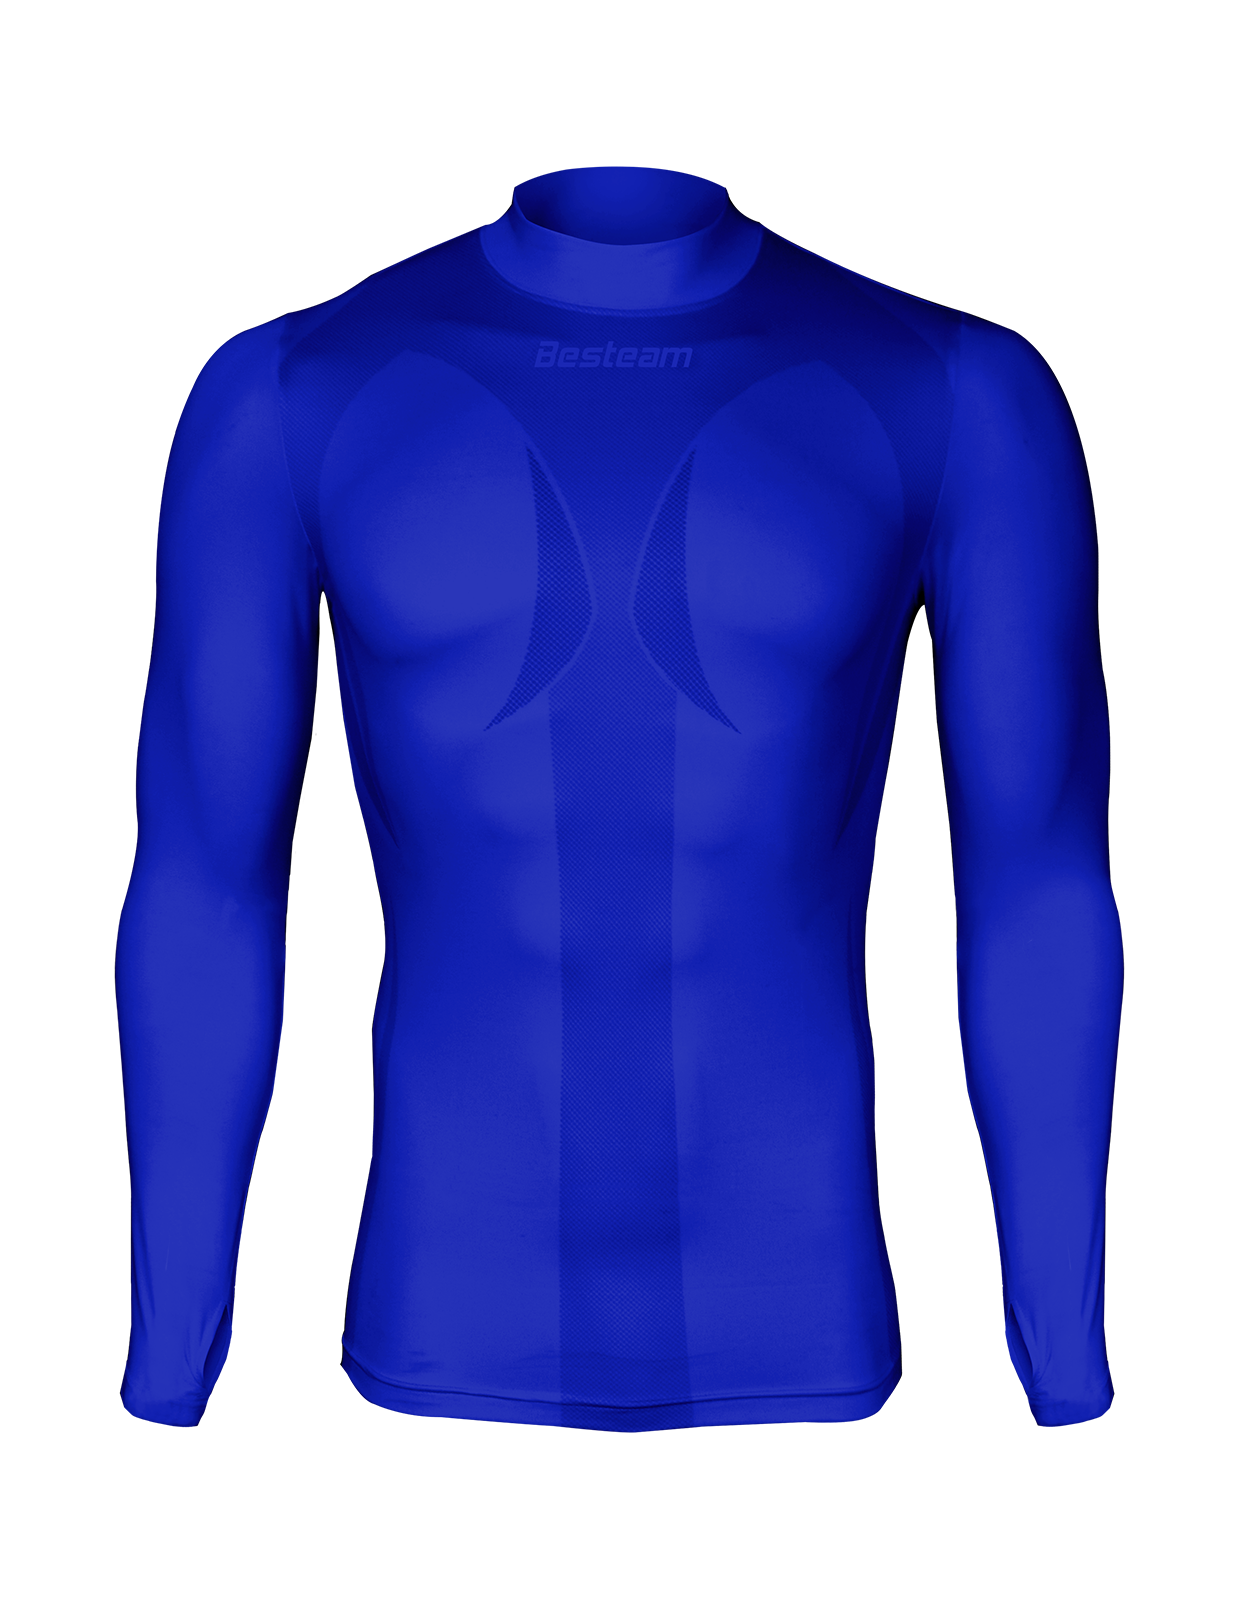 Compression Long Sleeve Top Royal Blue